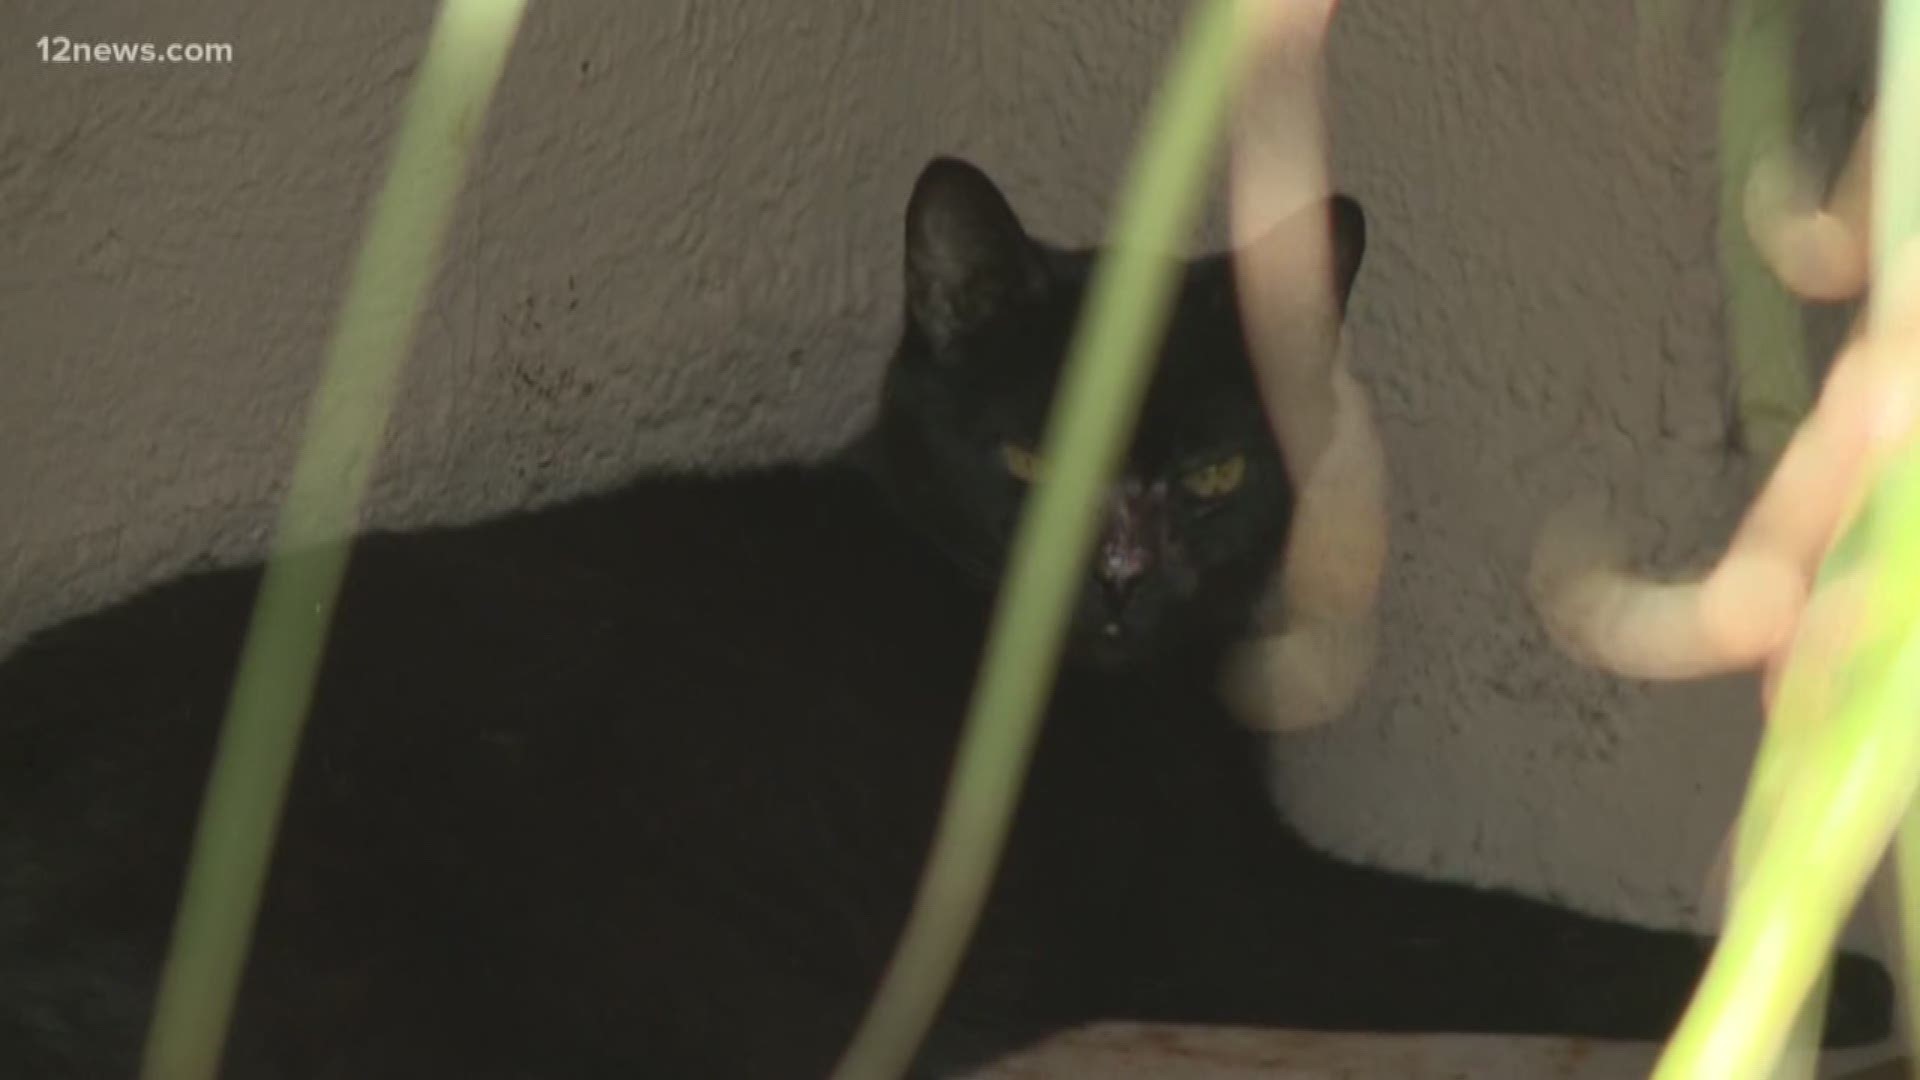 A Tempe neighborhood near McClintock High School is dealing with dead cats, finding nine dismembered cats since May. Tempe police say they believe it is the work of a wild animal, neighbors say the deaths a human caused.